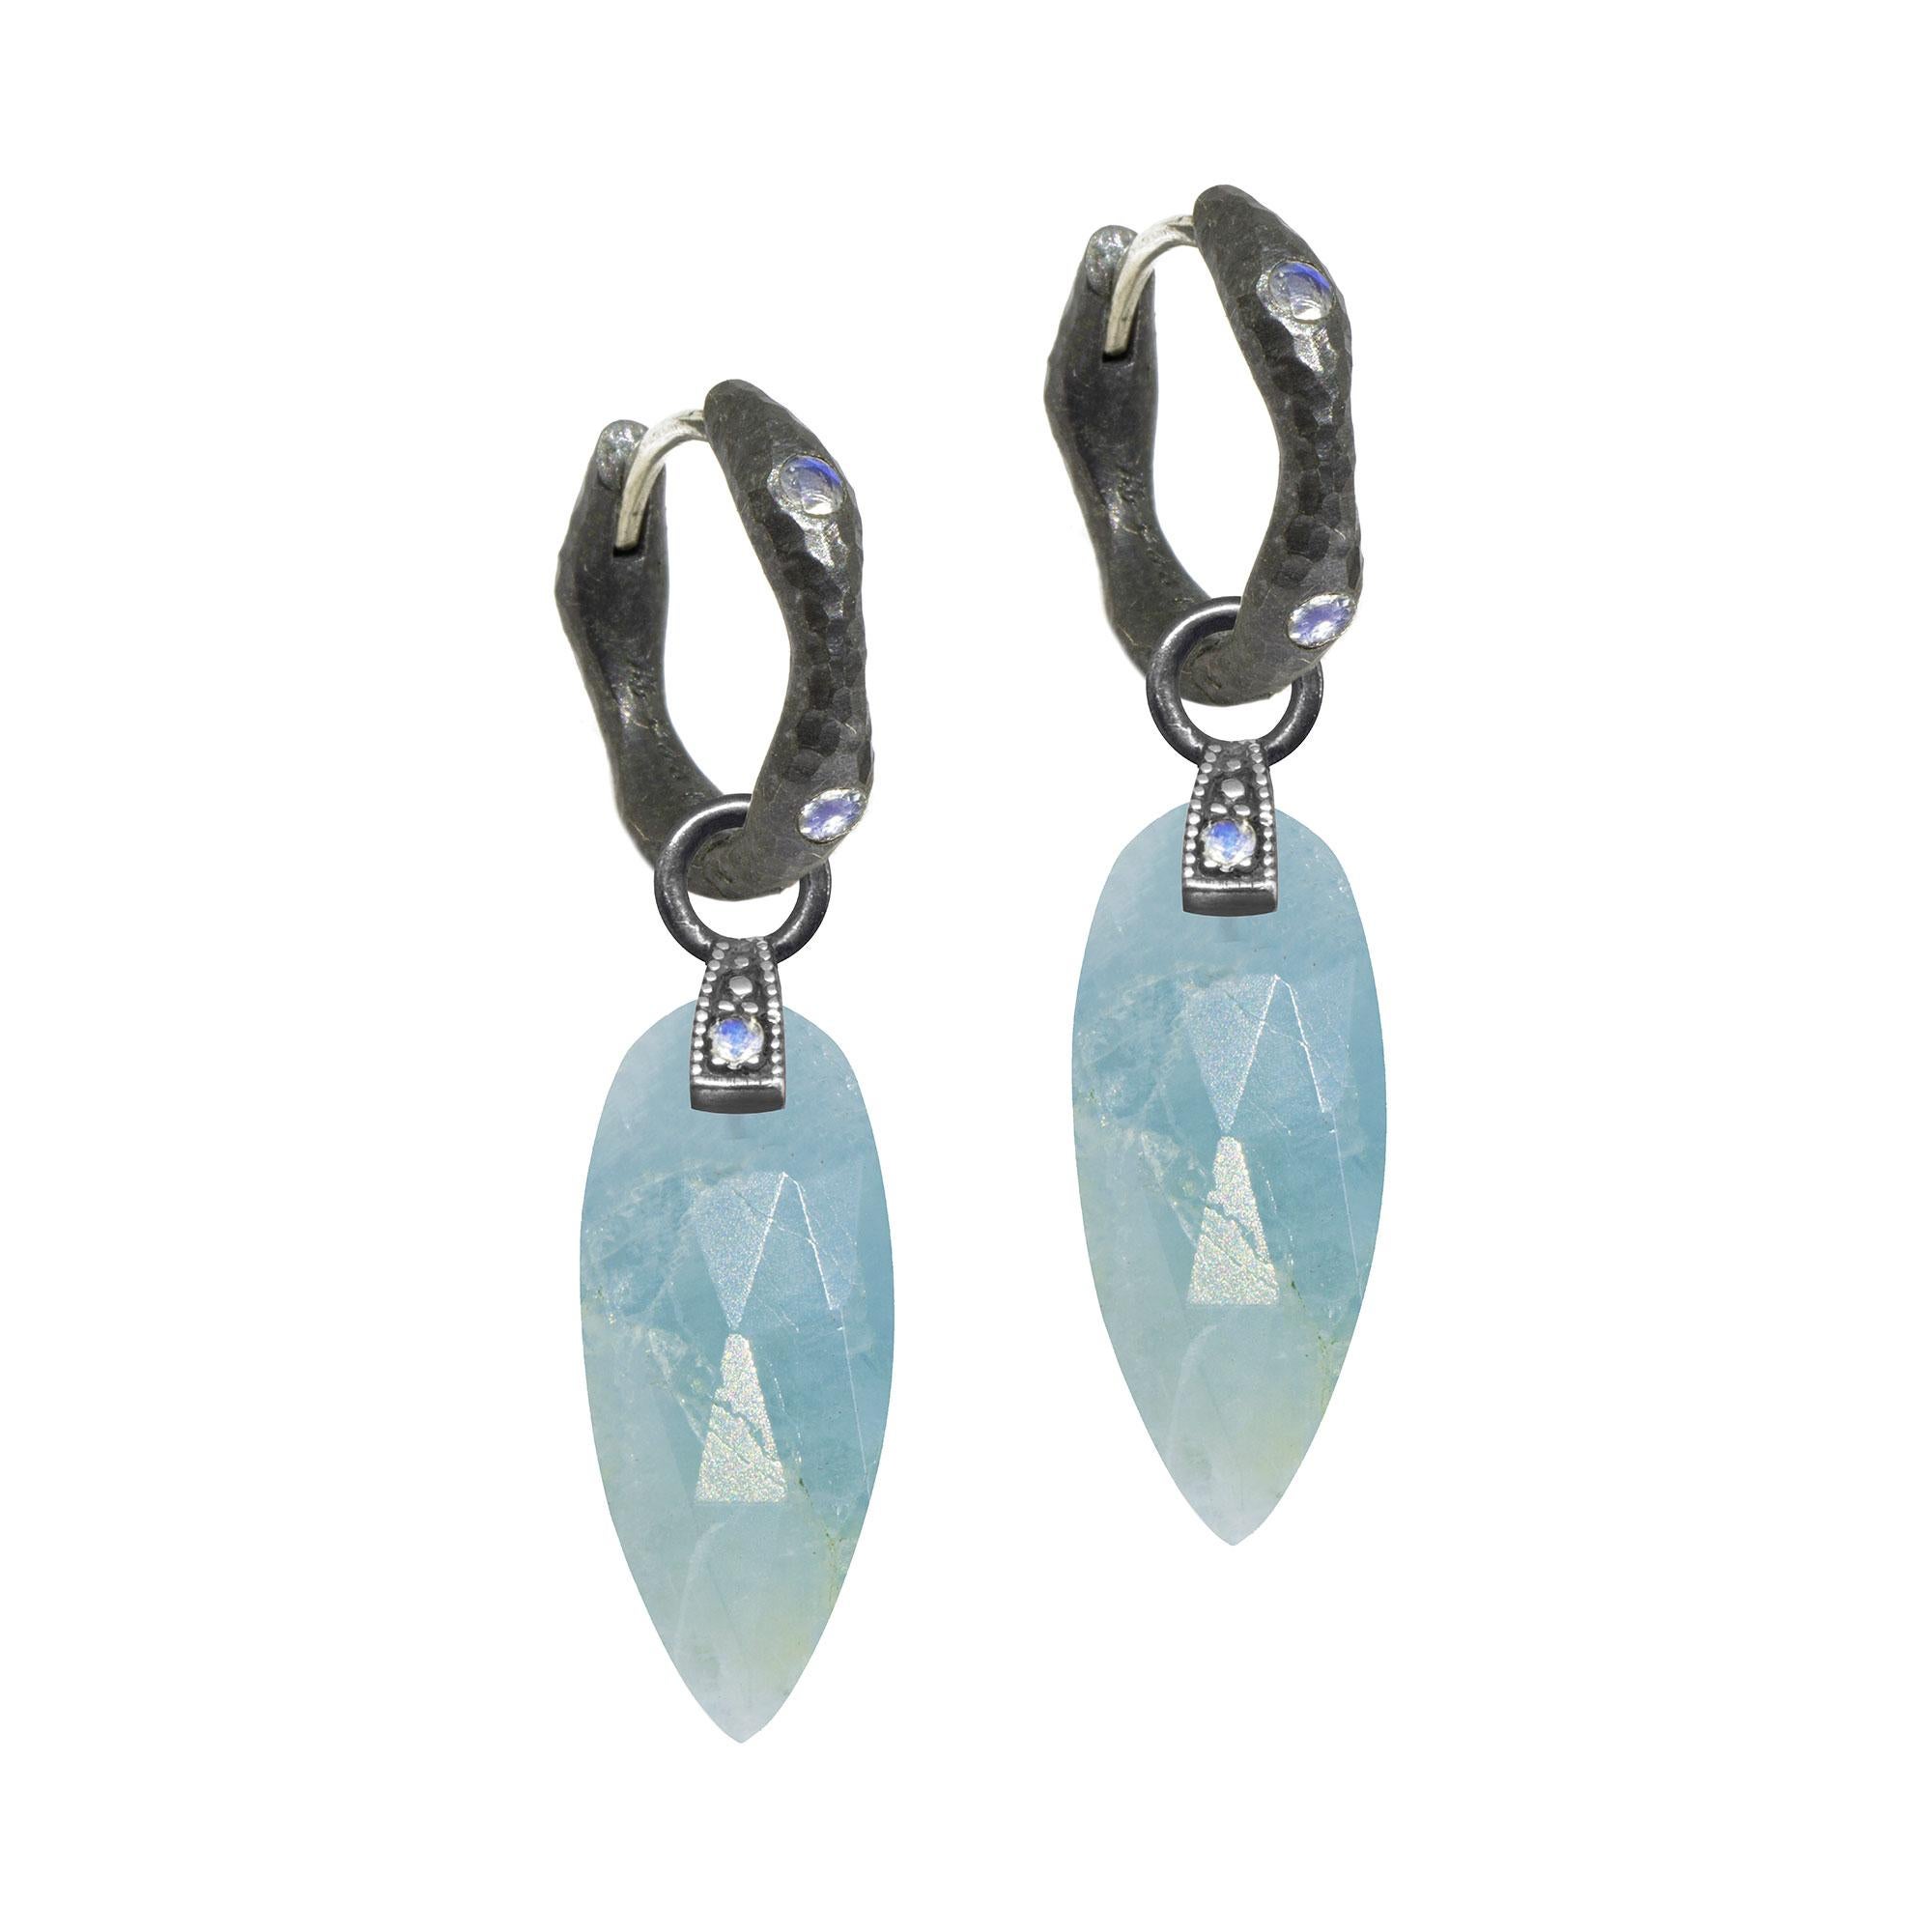 The perfect everyday style, the Angel Wings 20mm Oxidized Charms feature aquamarine drops dangling from a gemstone-studded bale.
Nina Nguyen Design's patent-pending earrings have an element on the back of the stud or charm to allow these pieces to